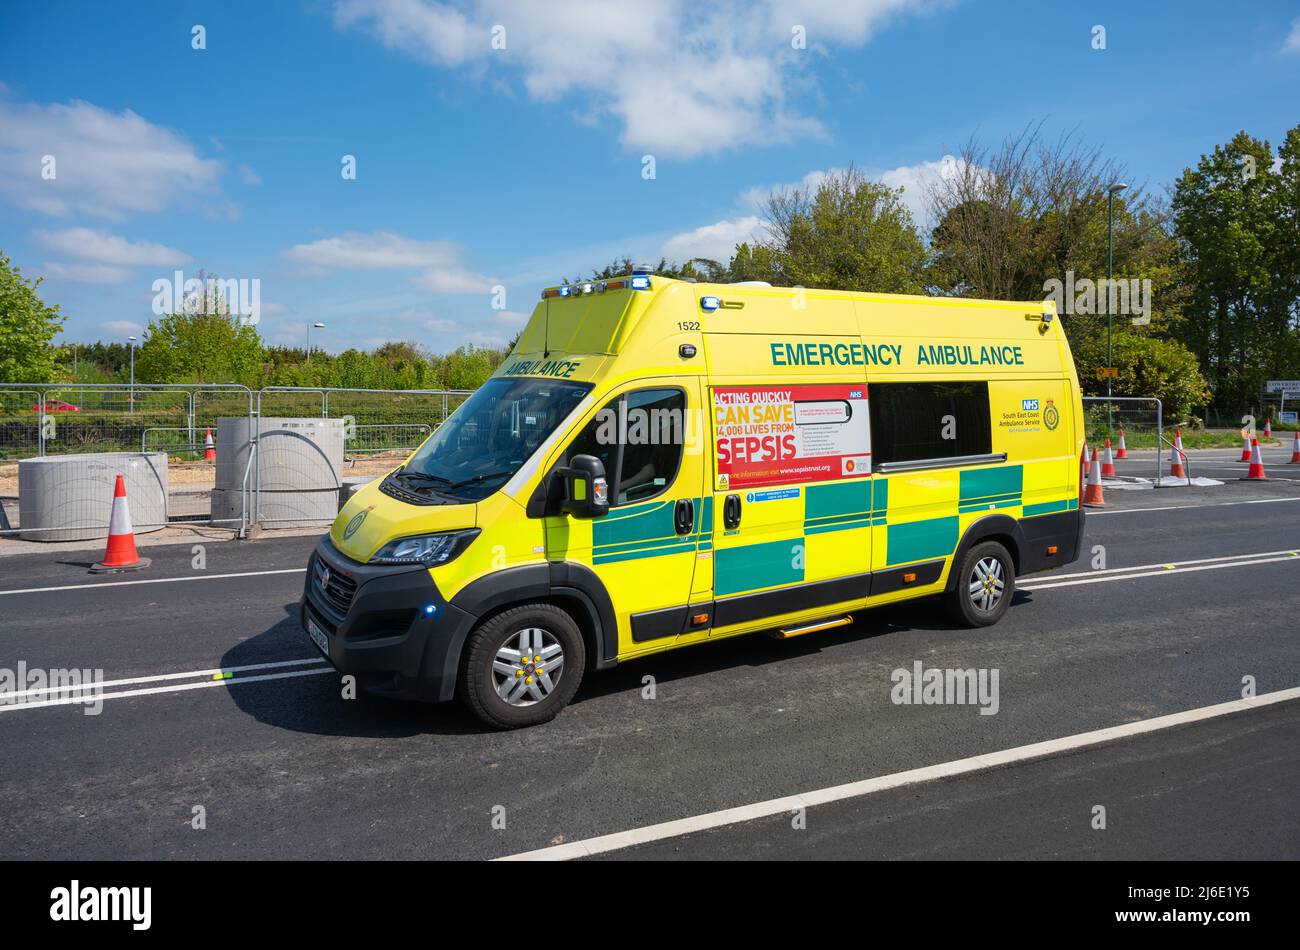 NHS emergency ambulance on a call with flashing blue lights on a main road in West Sussex, England, UK. Vehicle is a Fiat Ducato. Stock Photo